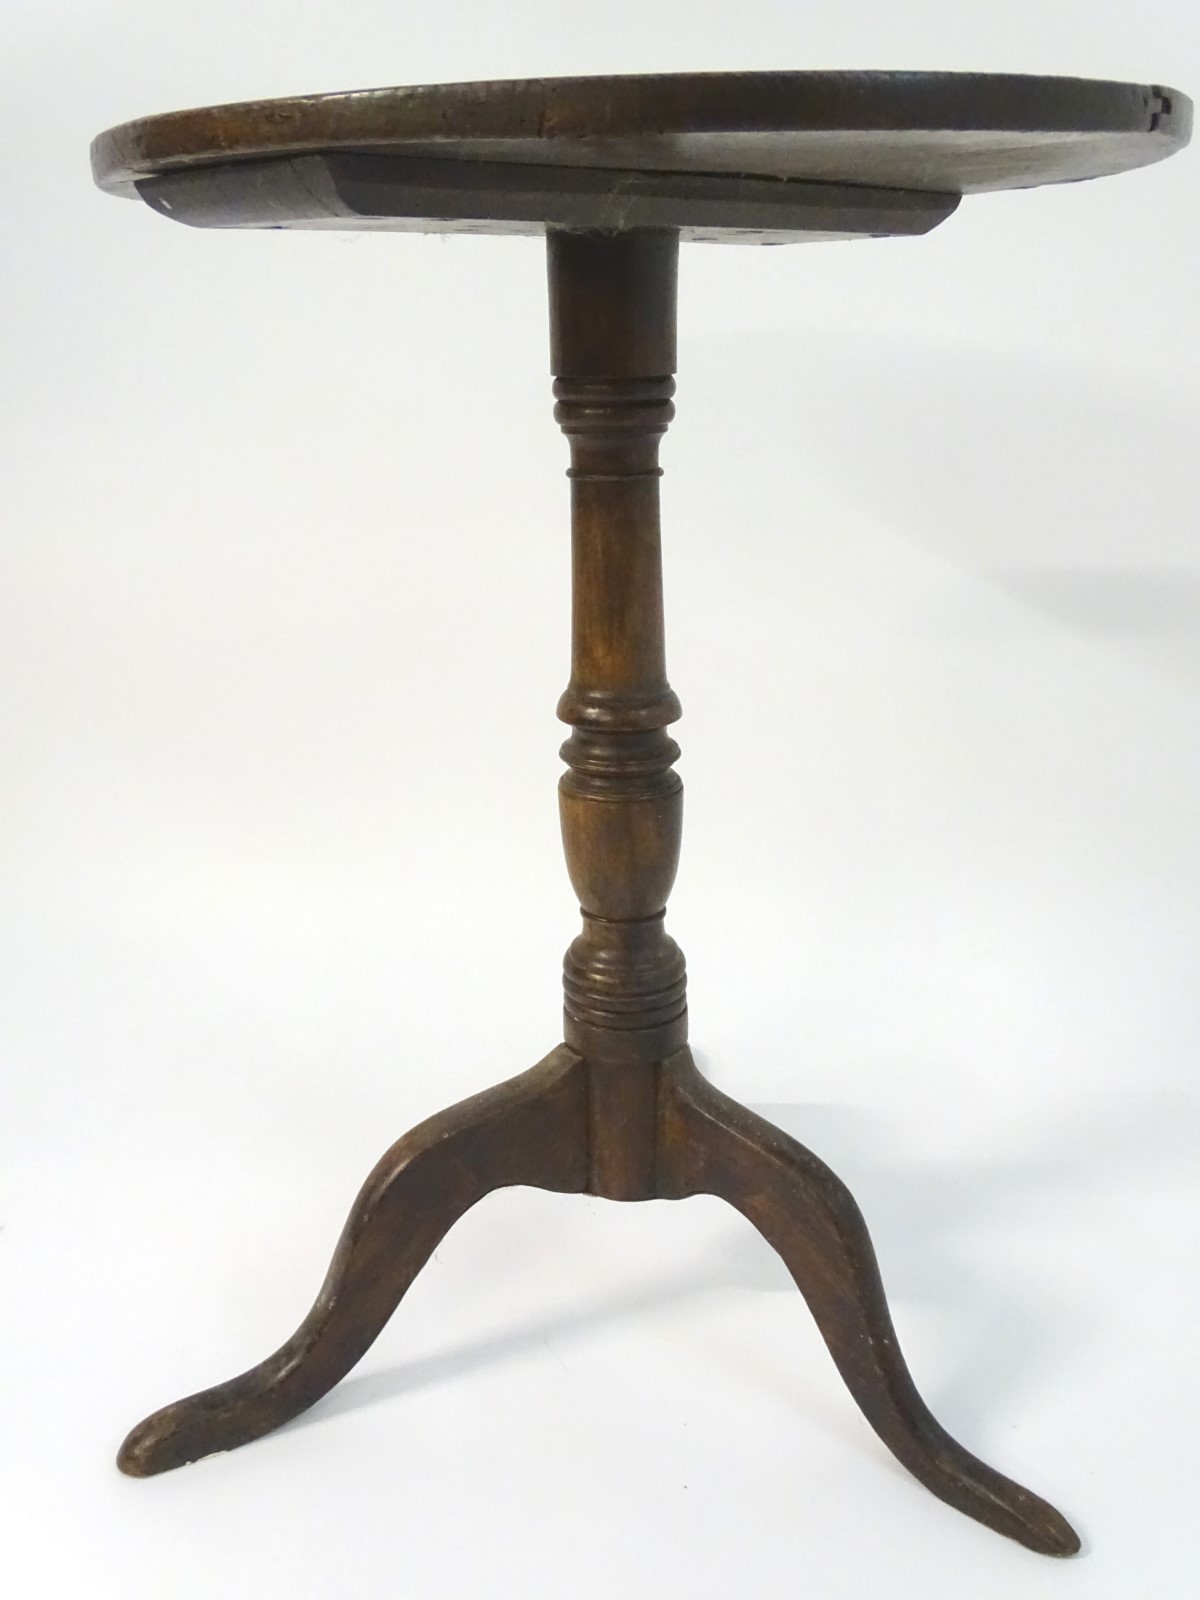 A late 18thC oak tripod table with a circular table top above a turned stem and standing on three - Image 6 of 7